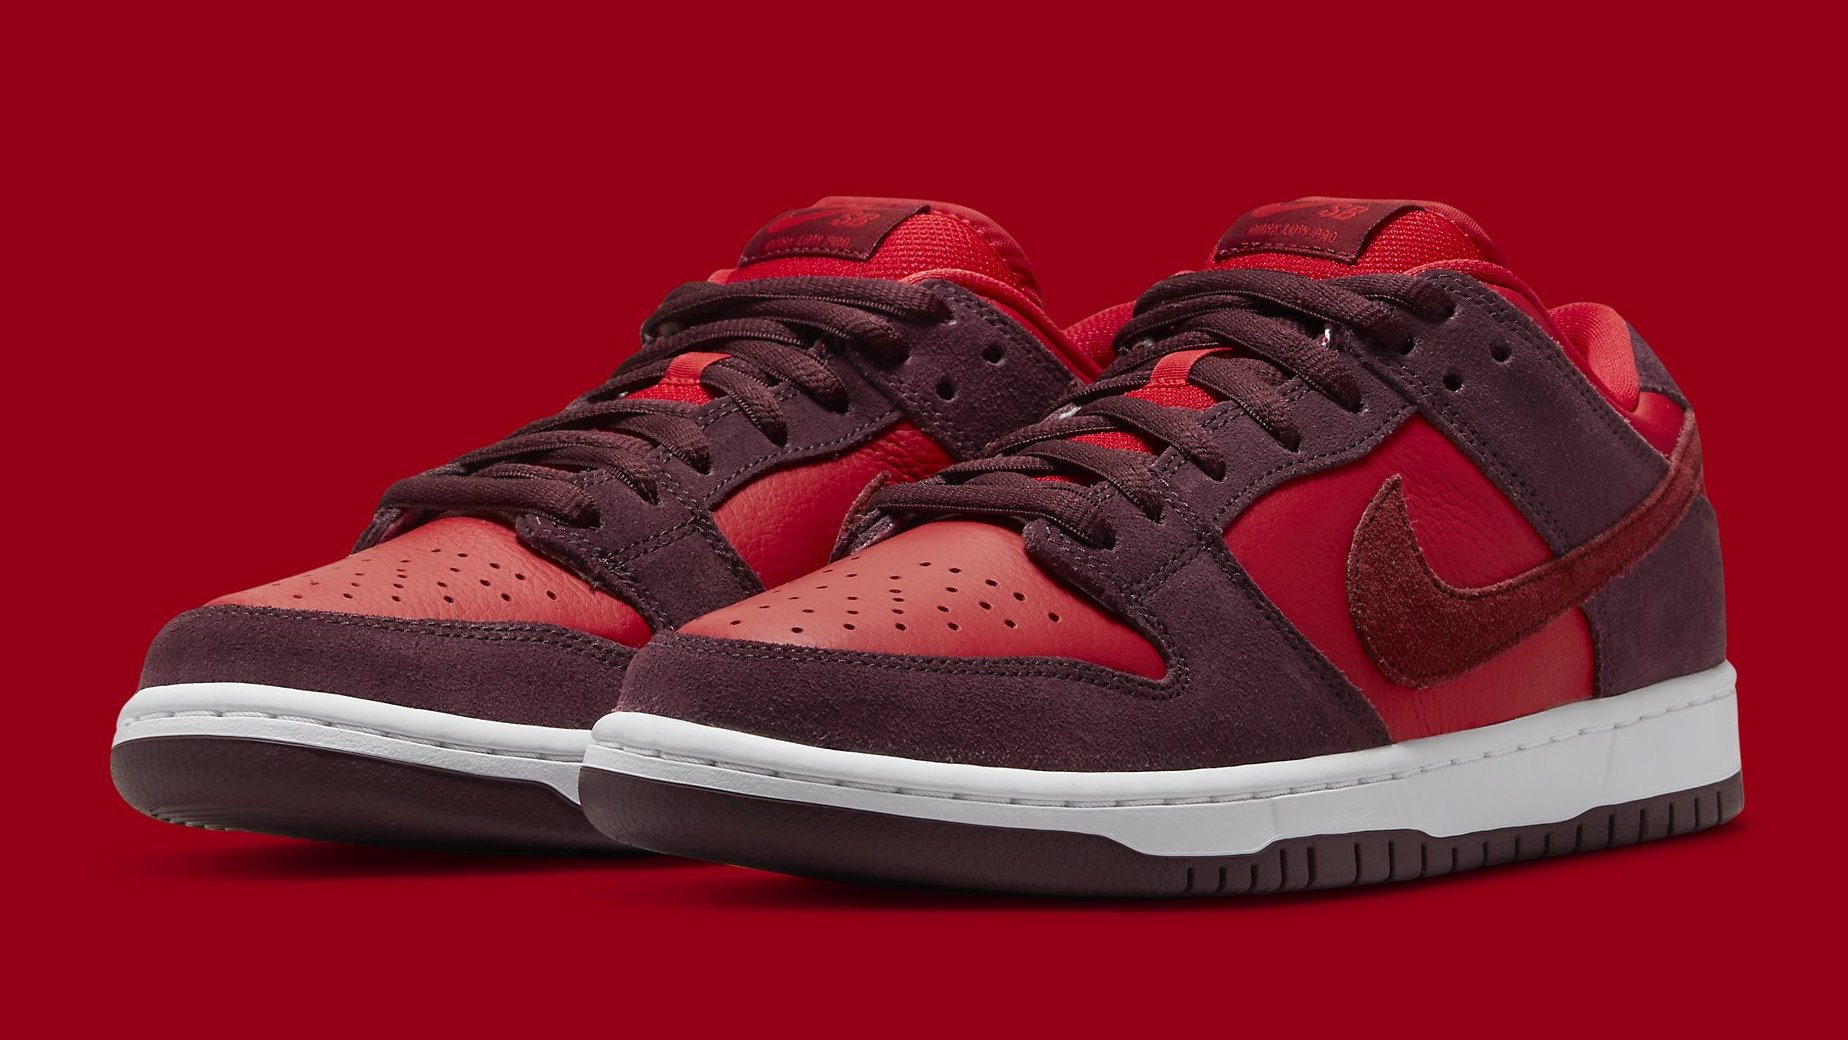 geduldig zwak lunch This Nike SB Dunk Low Is Cherry Flavored | Complex